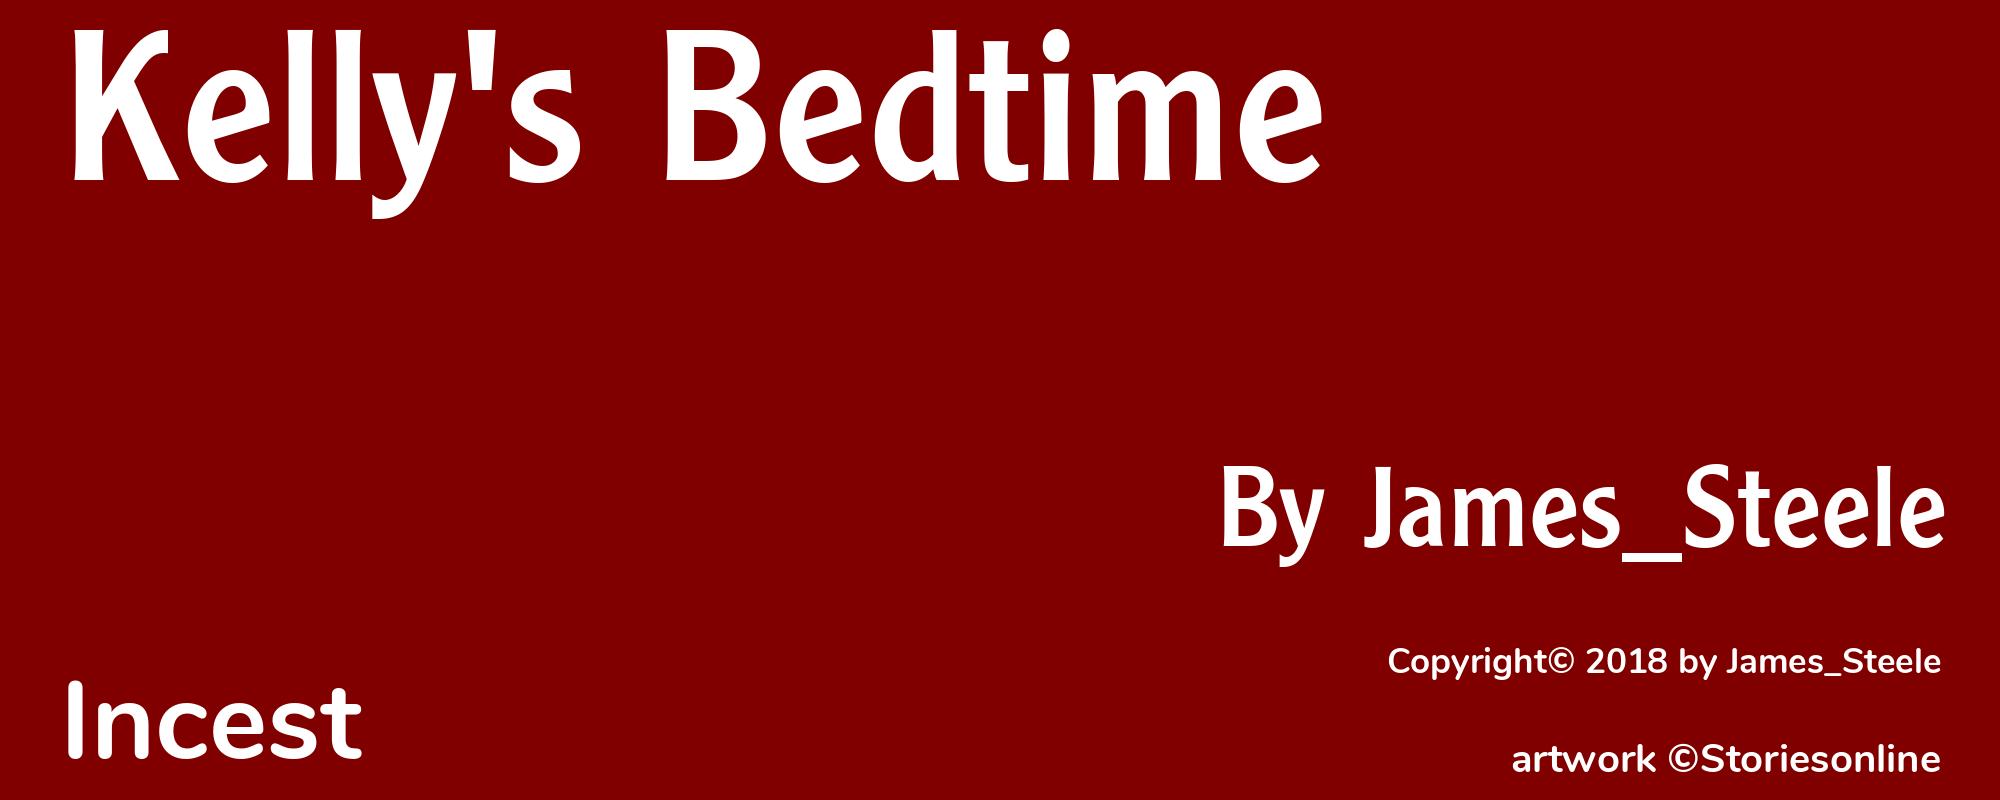 Kelly's Bedtime - Cover